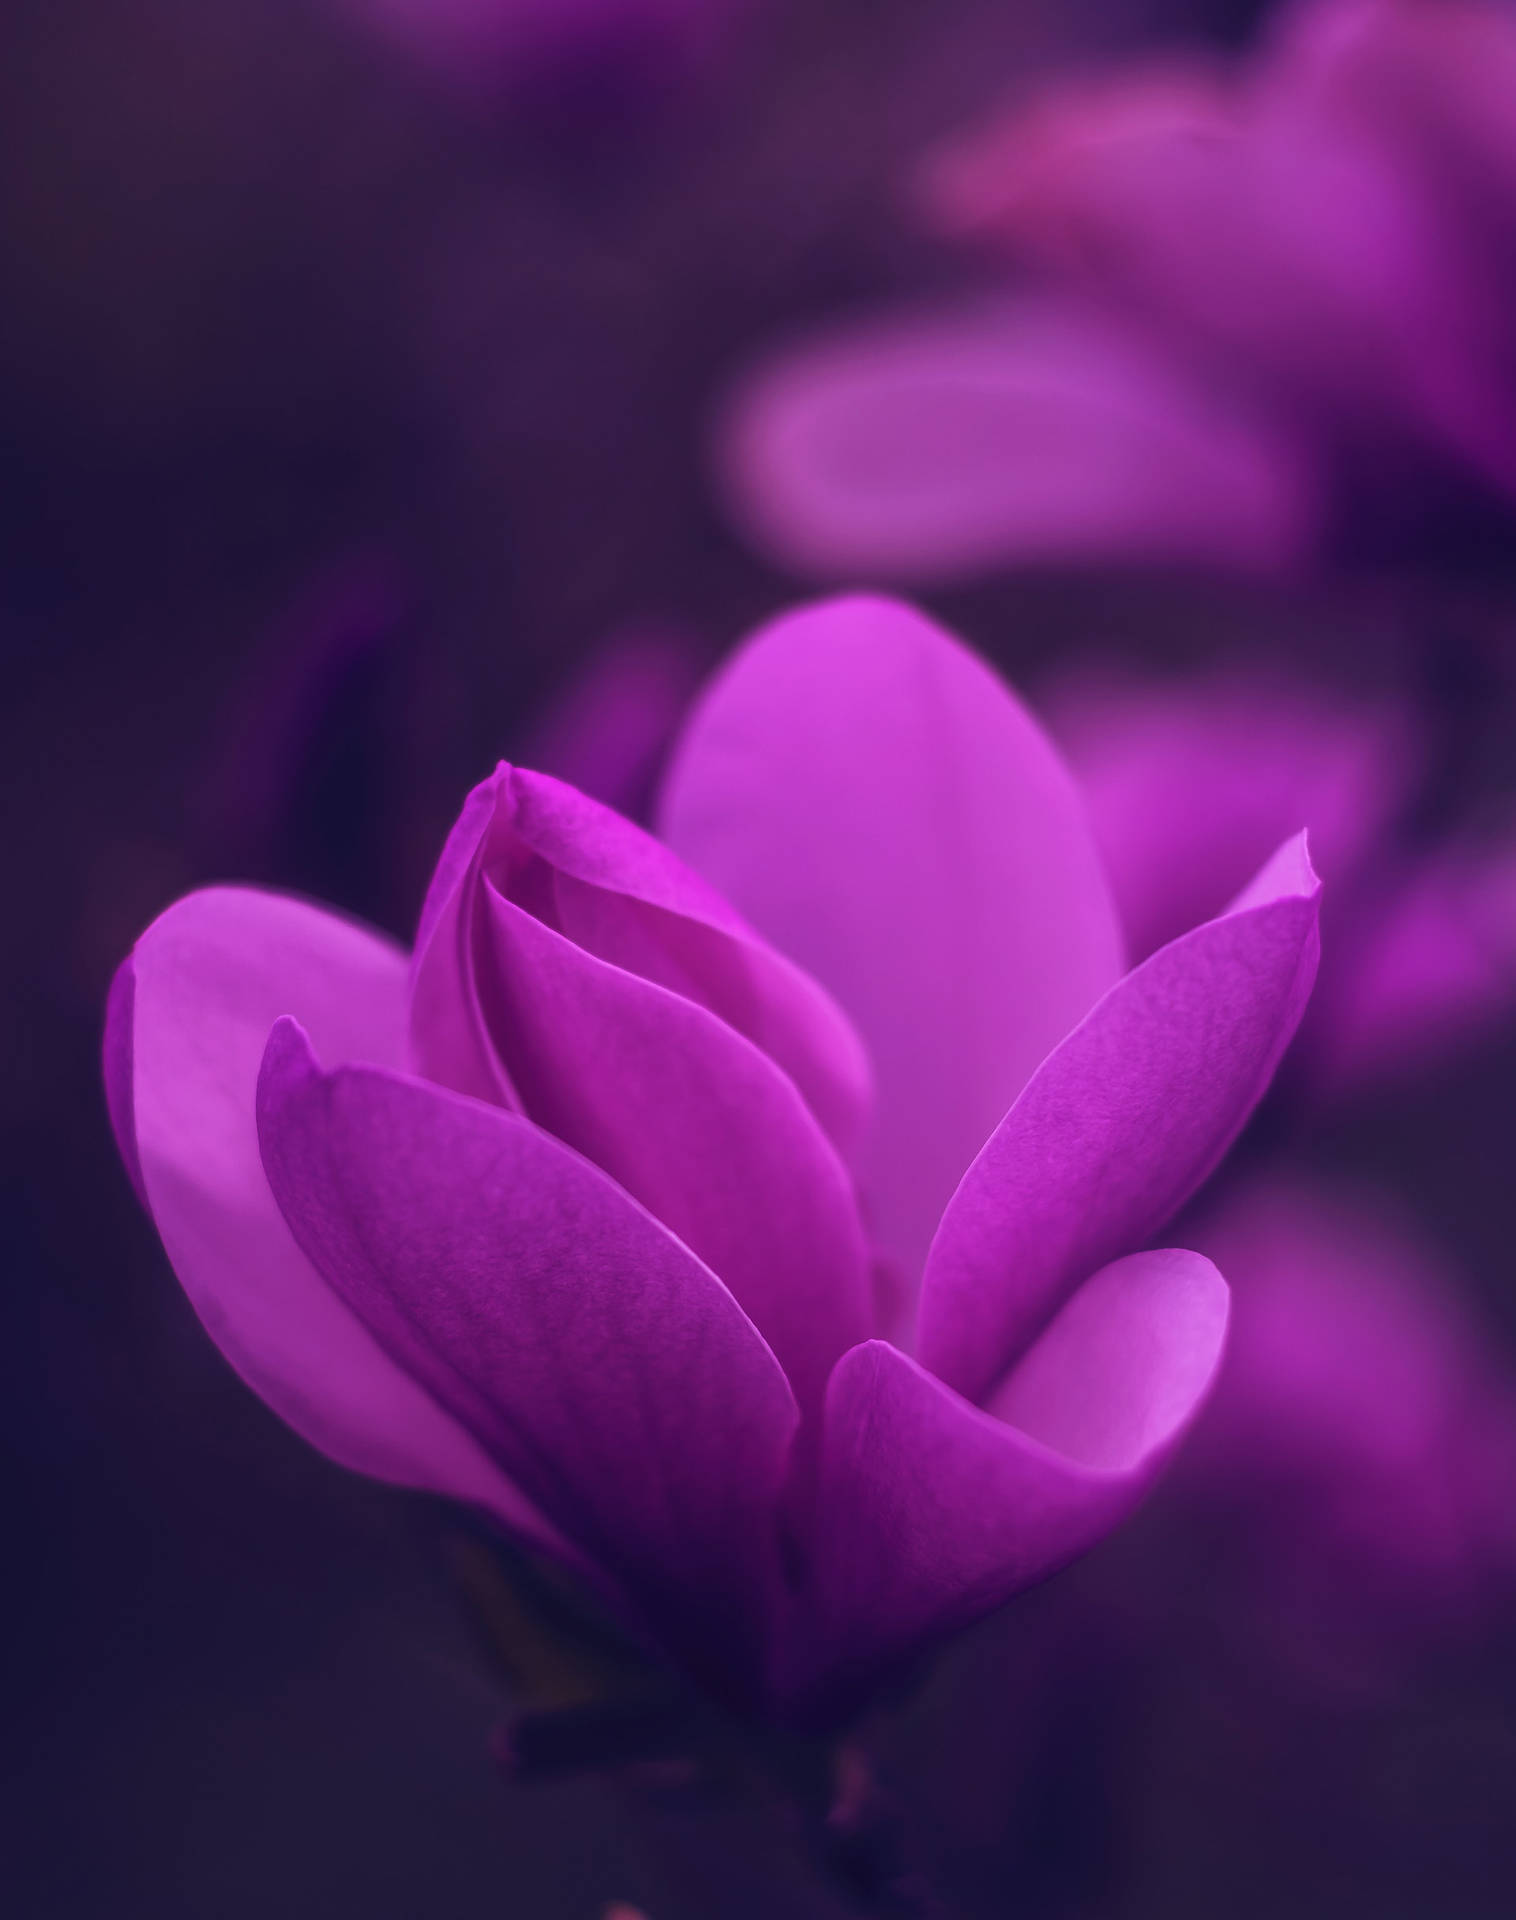 Cyclamen Persicum Flower Android Background